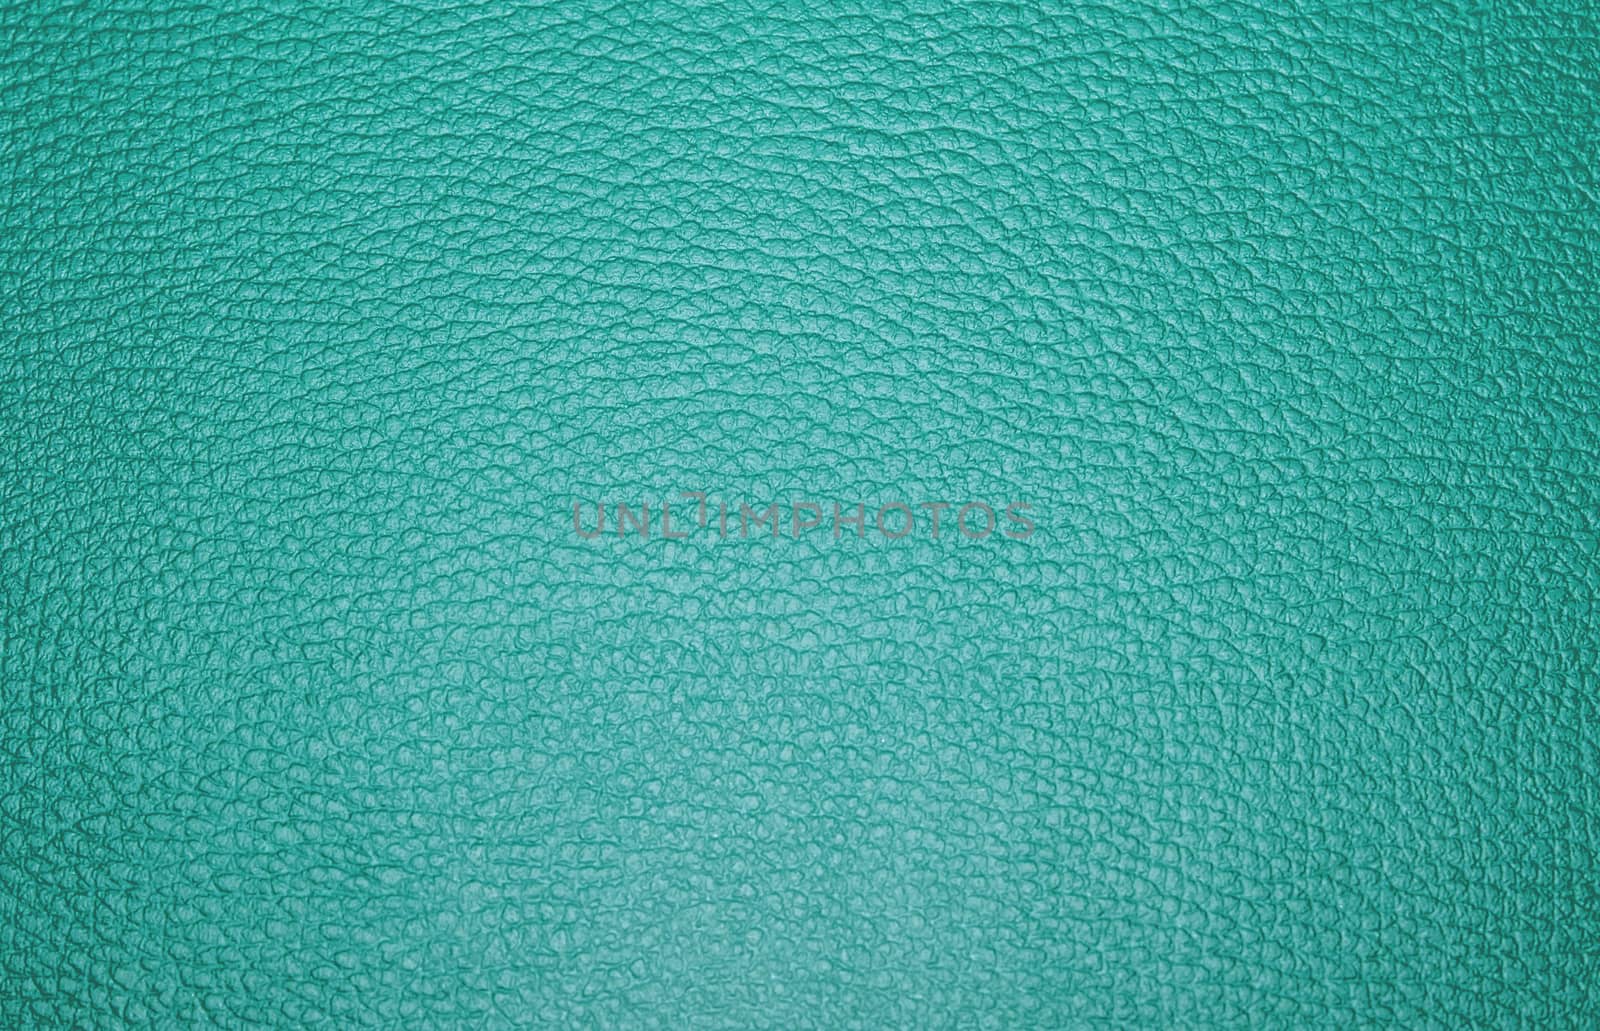 Texture colored leatherette green, for design and upholstery for decoration and fashion, for the background and tukstur